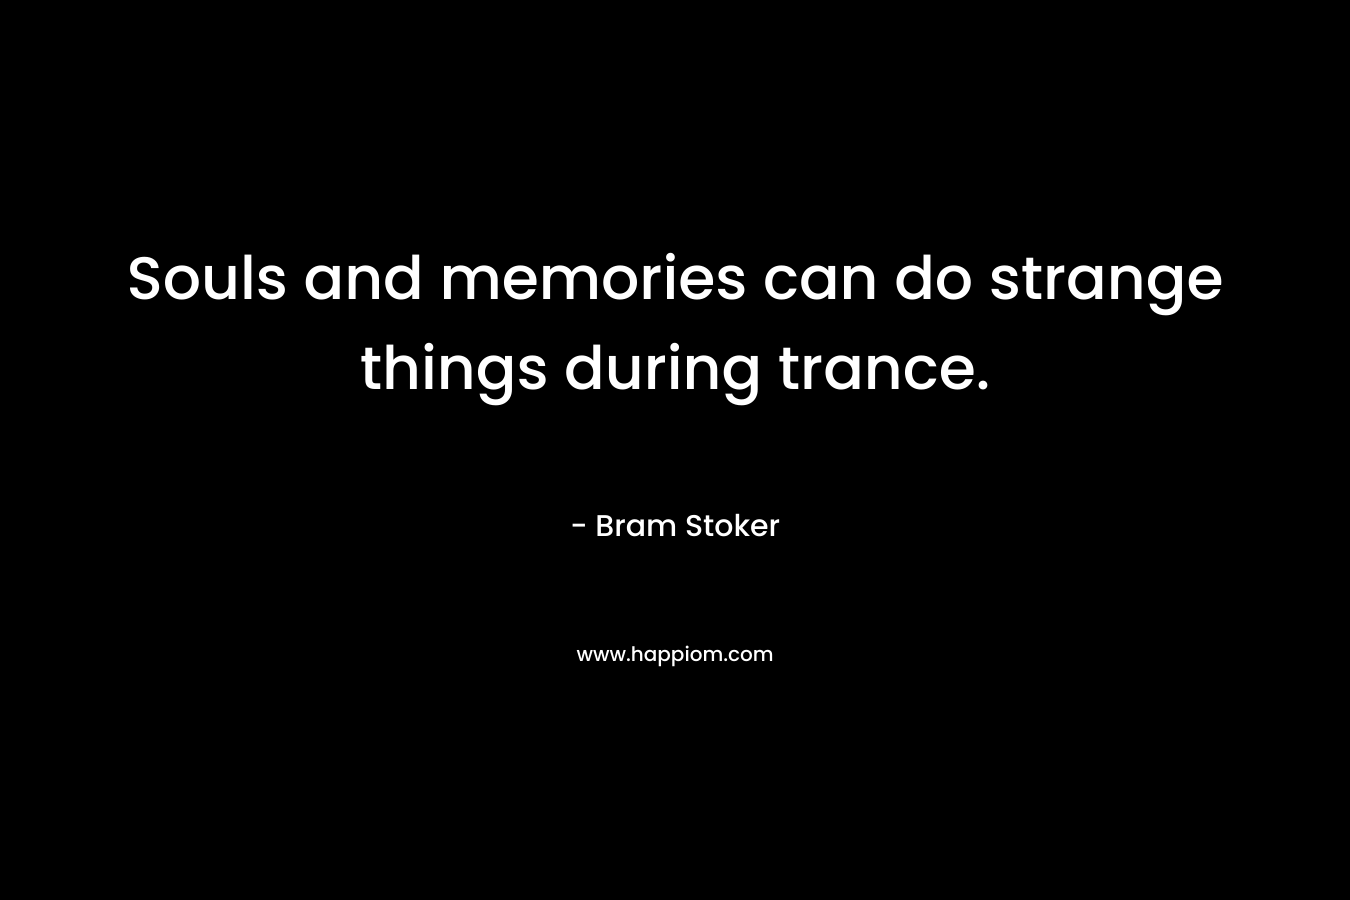 Souls and memories can do strange things during trance.